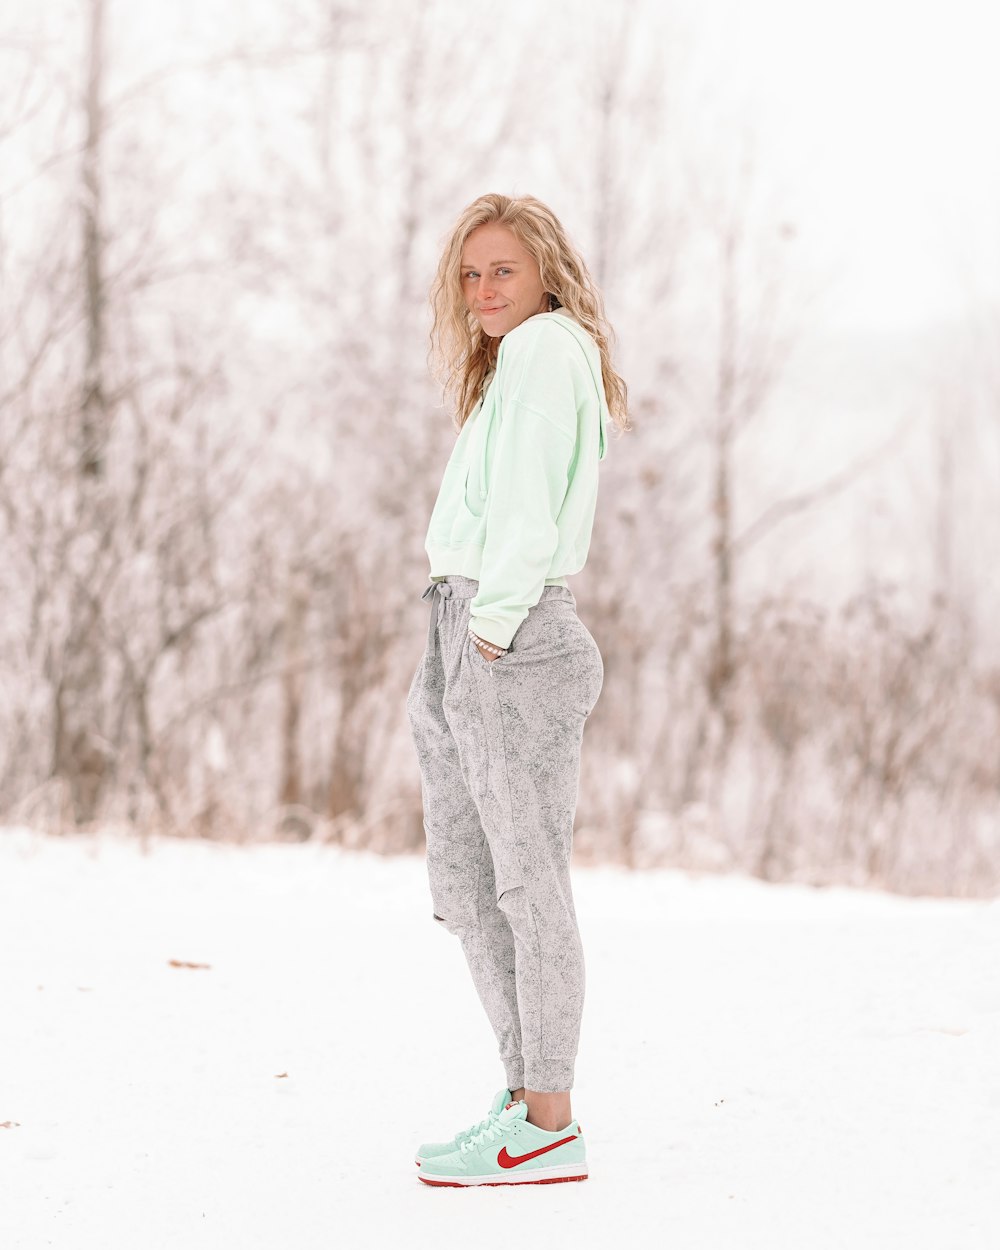 woman in white long sleeve shirt and gray pants standing on snow covered ground during daytime